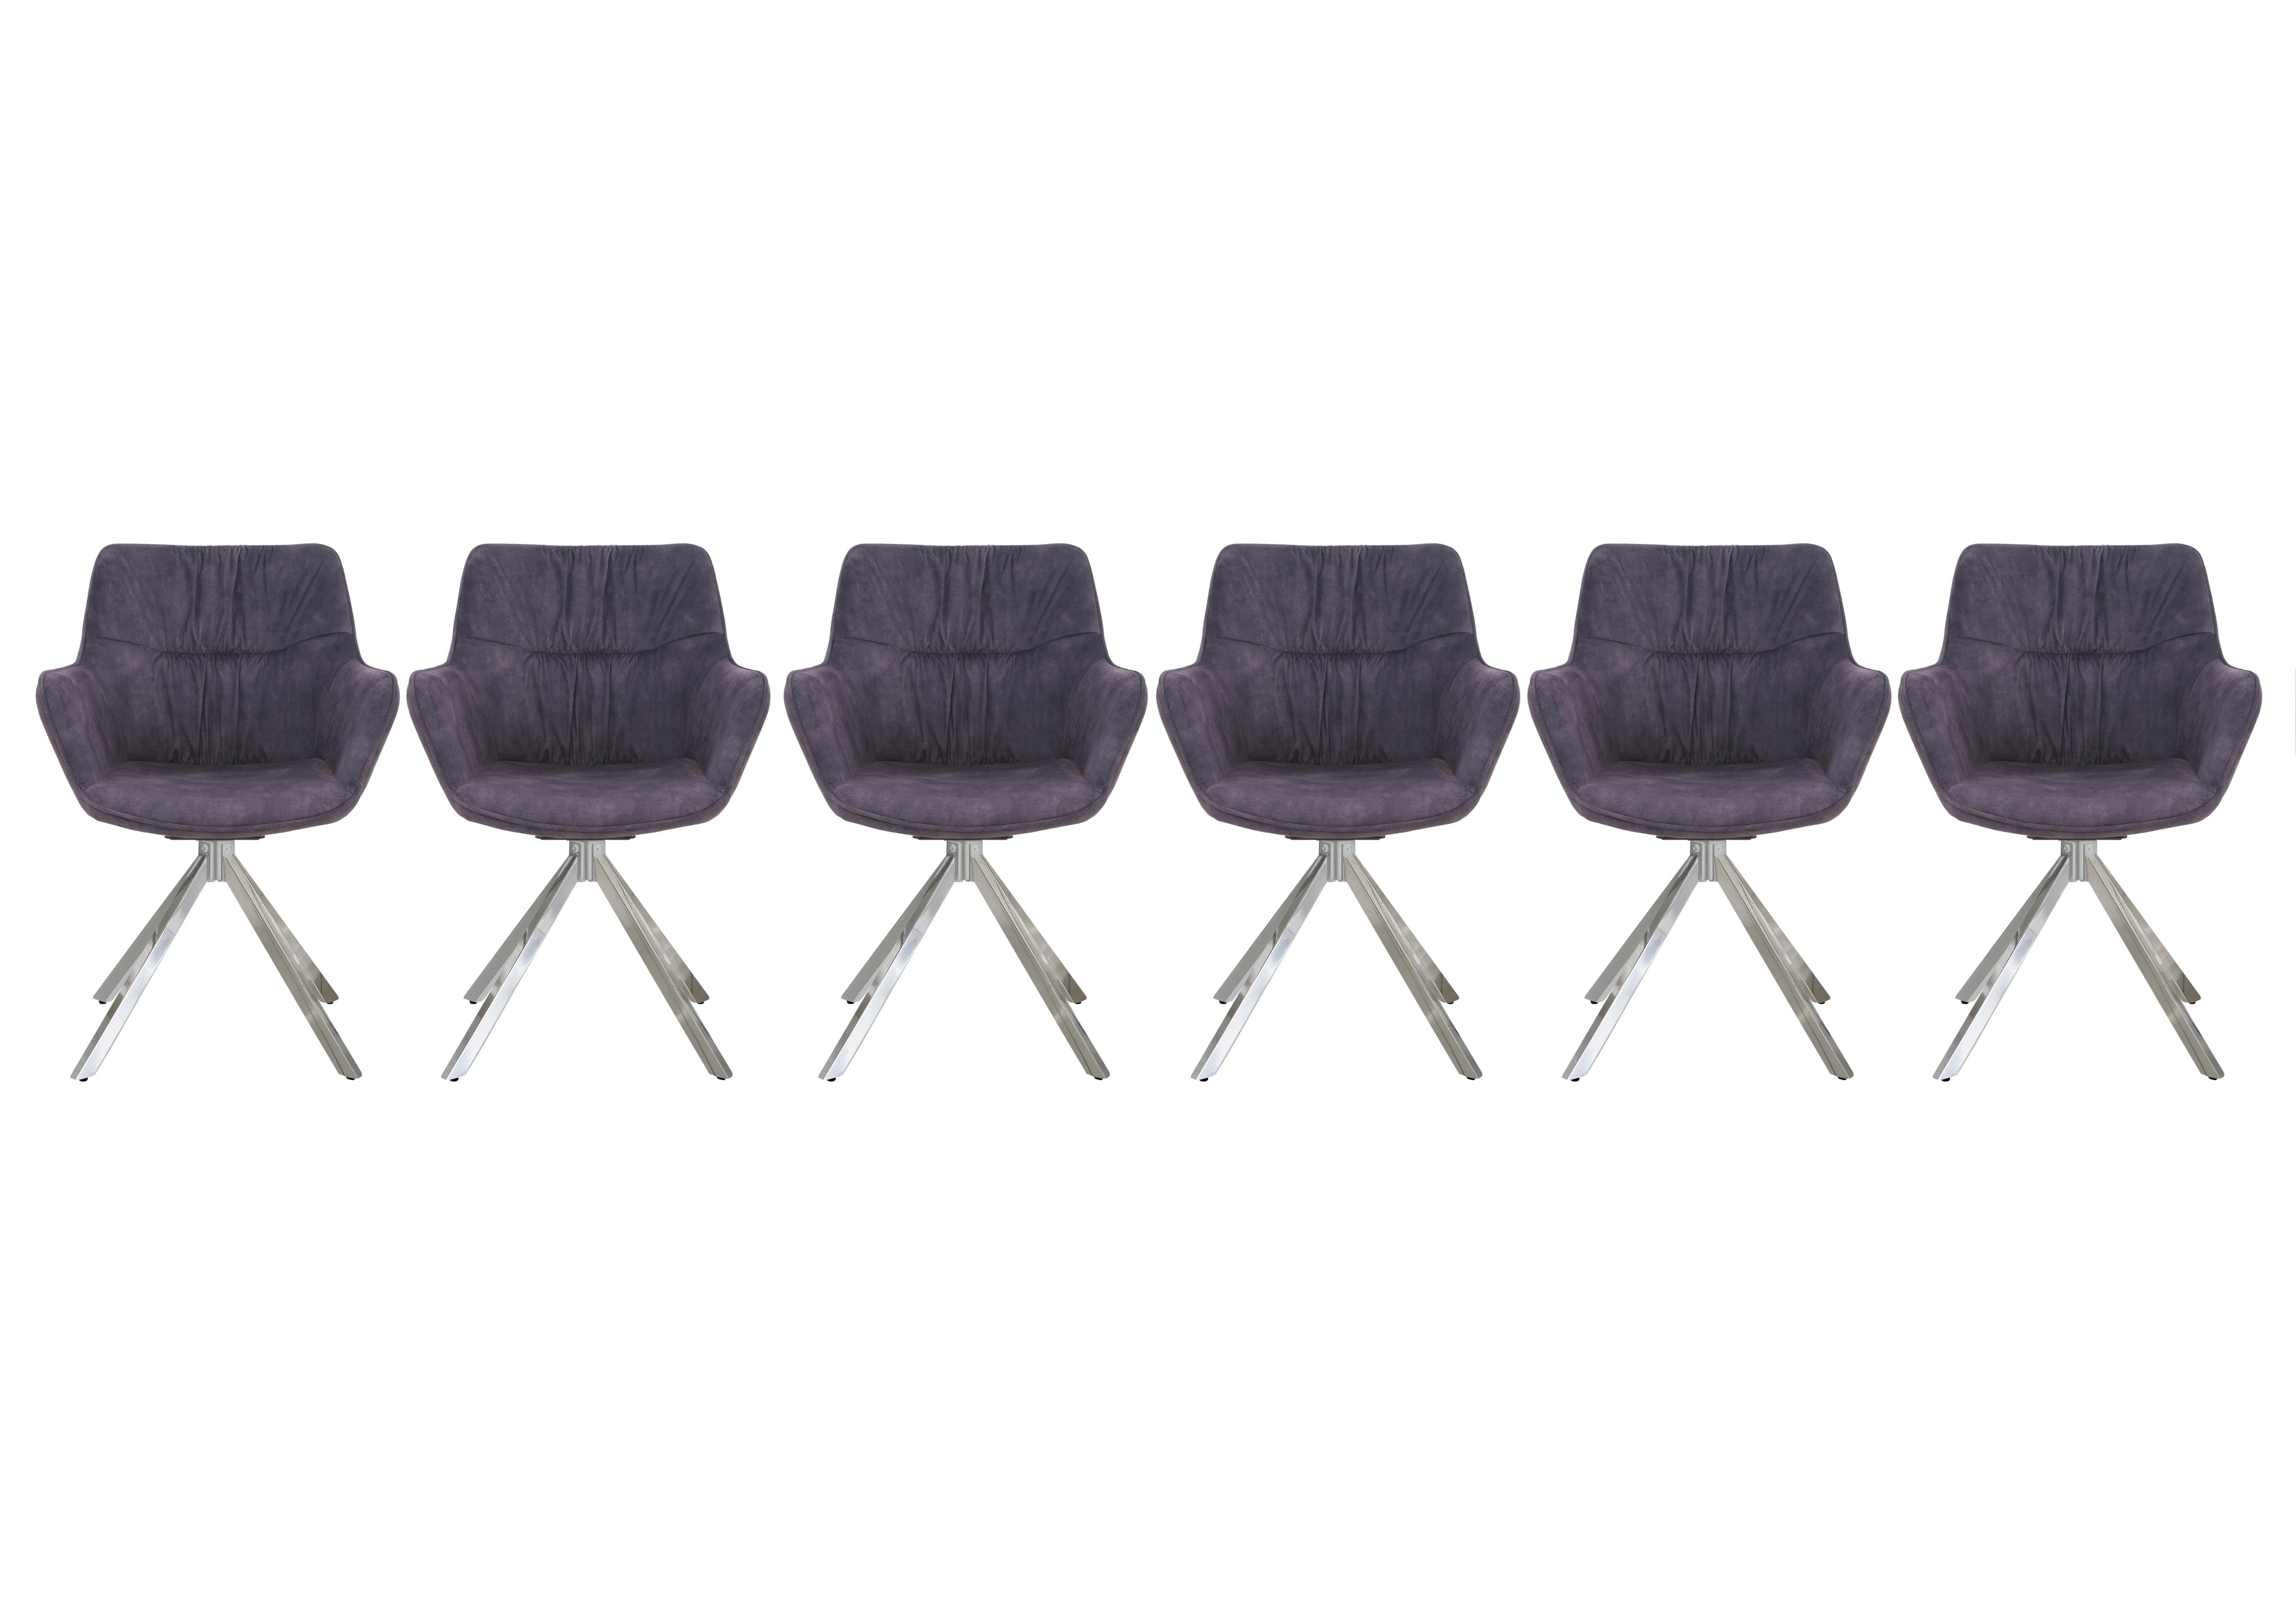 Marvel Chrome Set of 6 Swivel Dining Chairs in Charcoal on Furniture Village